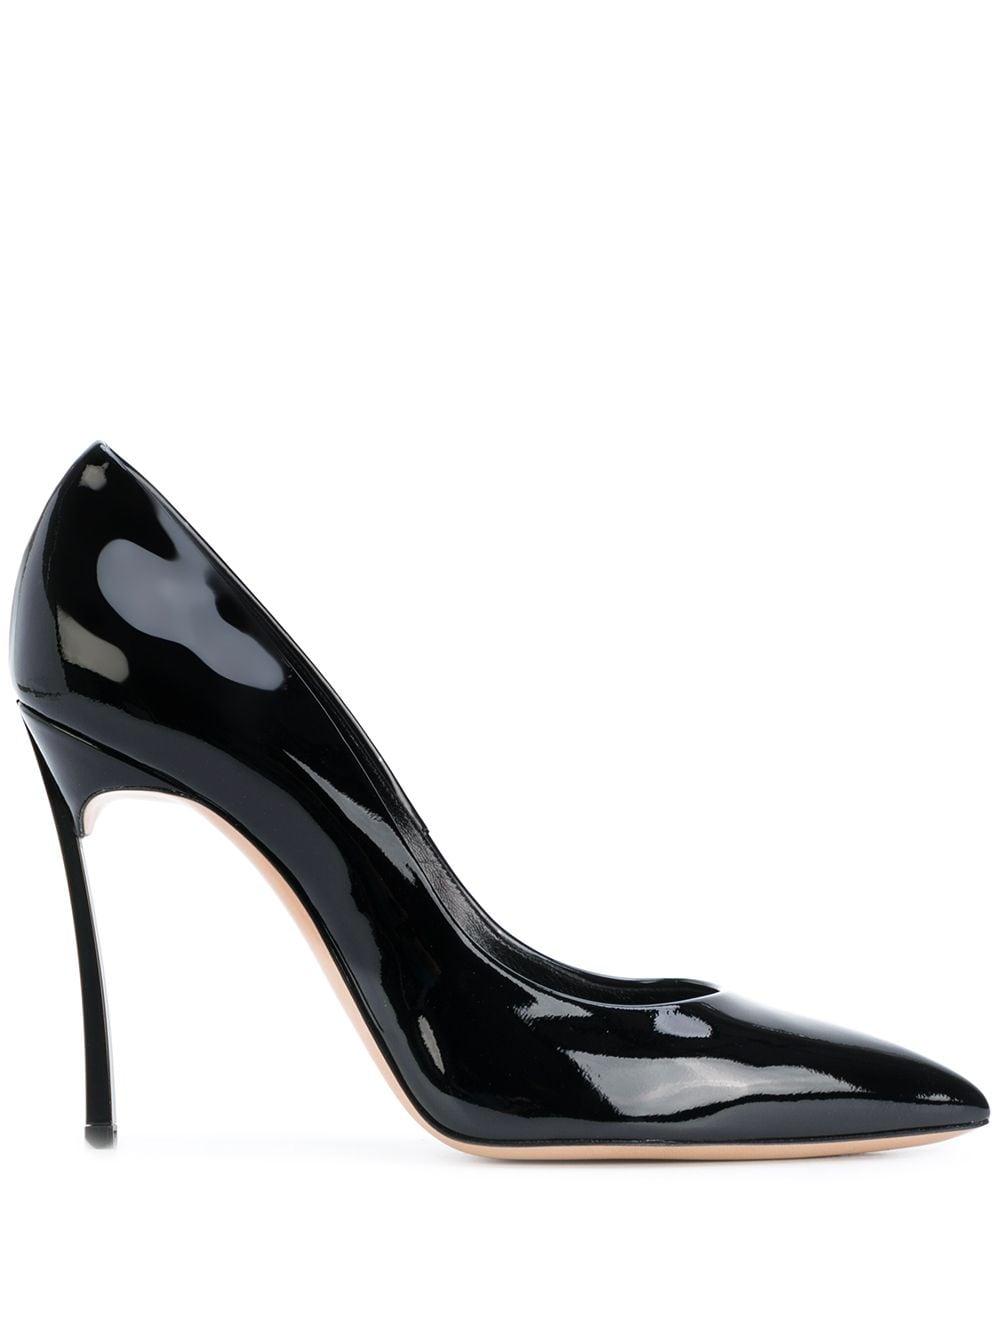 Casadei Leather Blade Pumps in Black - Save 11% - Lyst